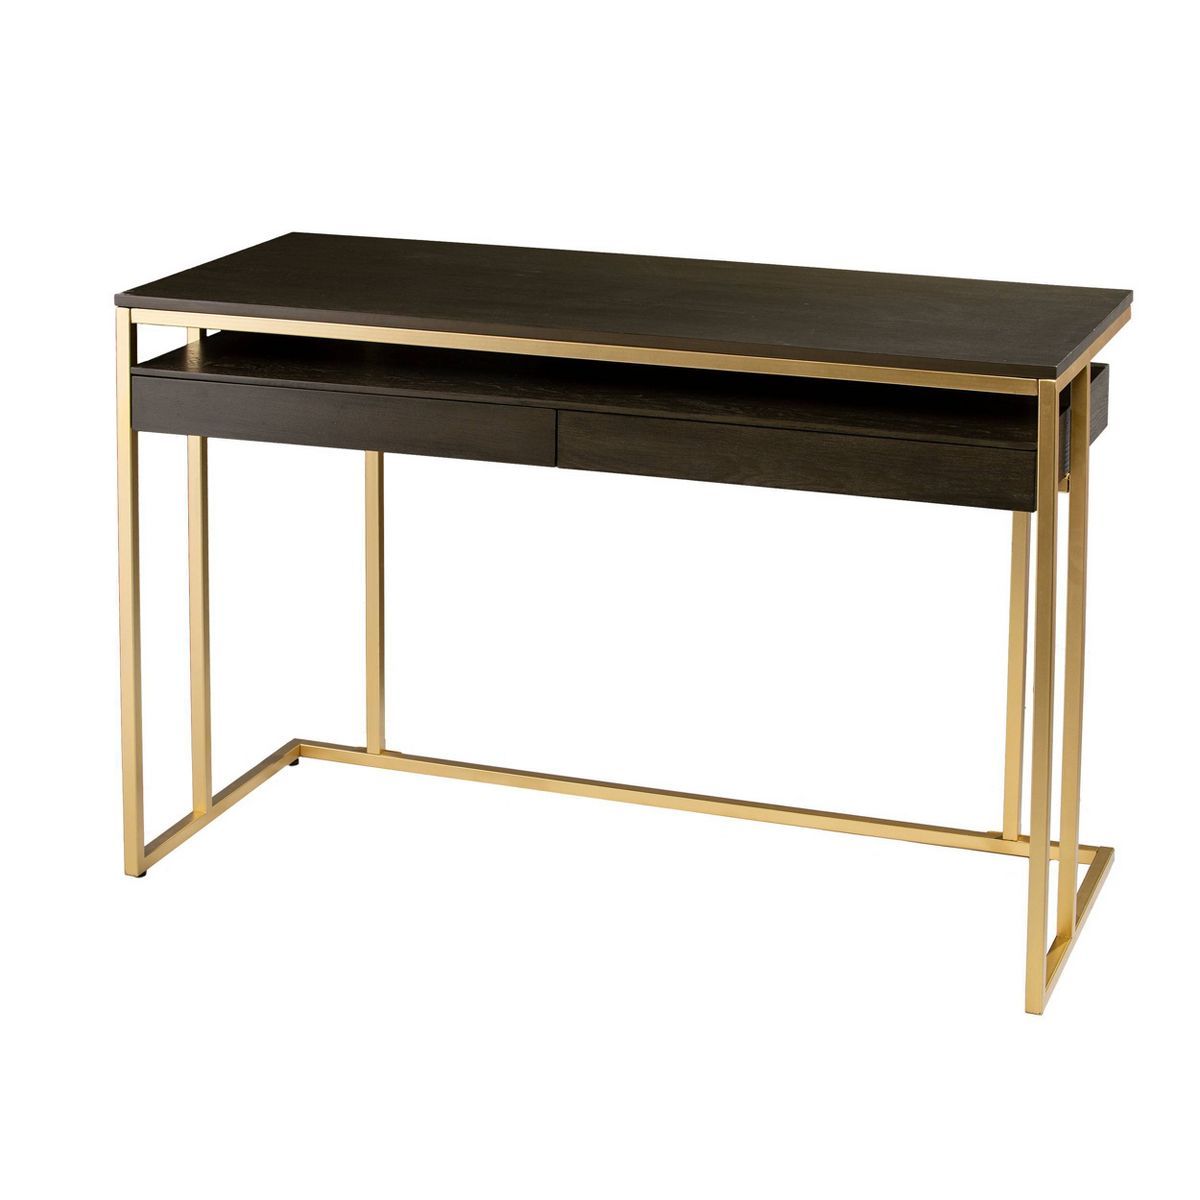 Quinal Writing Desk with Storage Brown/Gold - Aiden Lane | Target